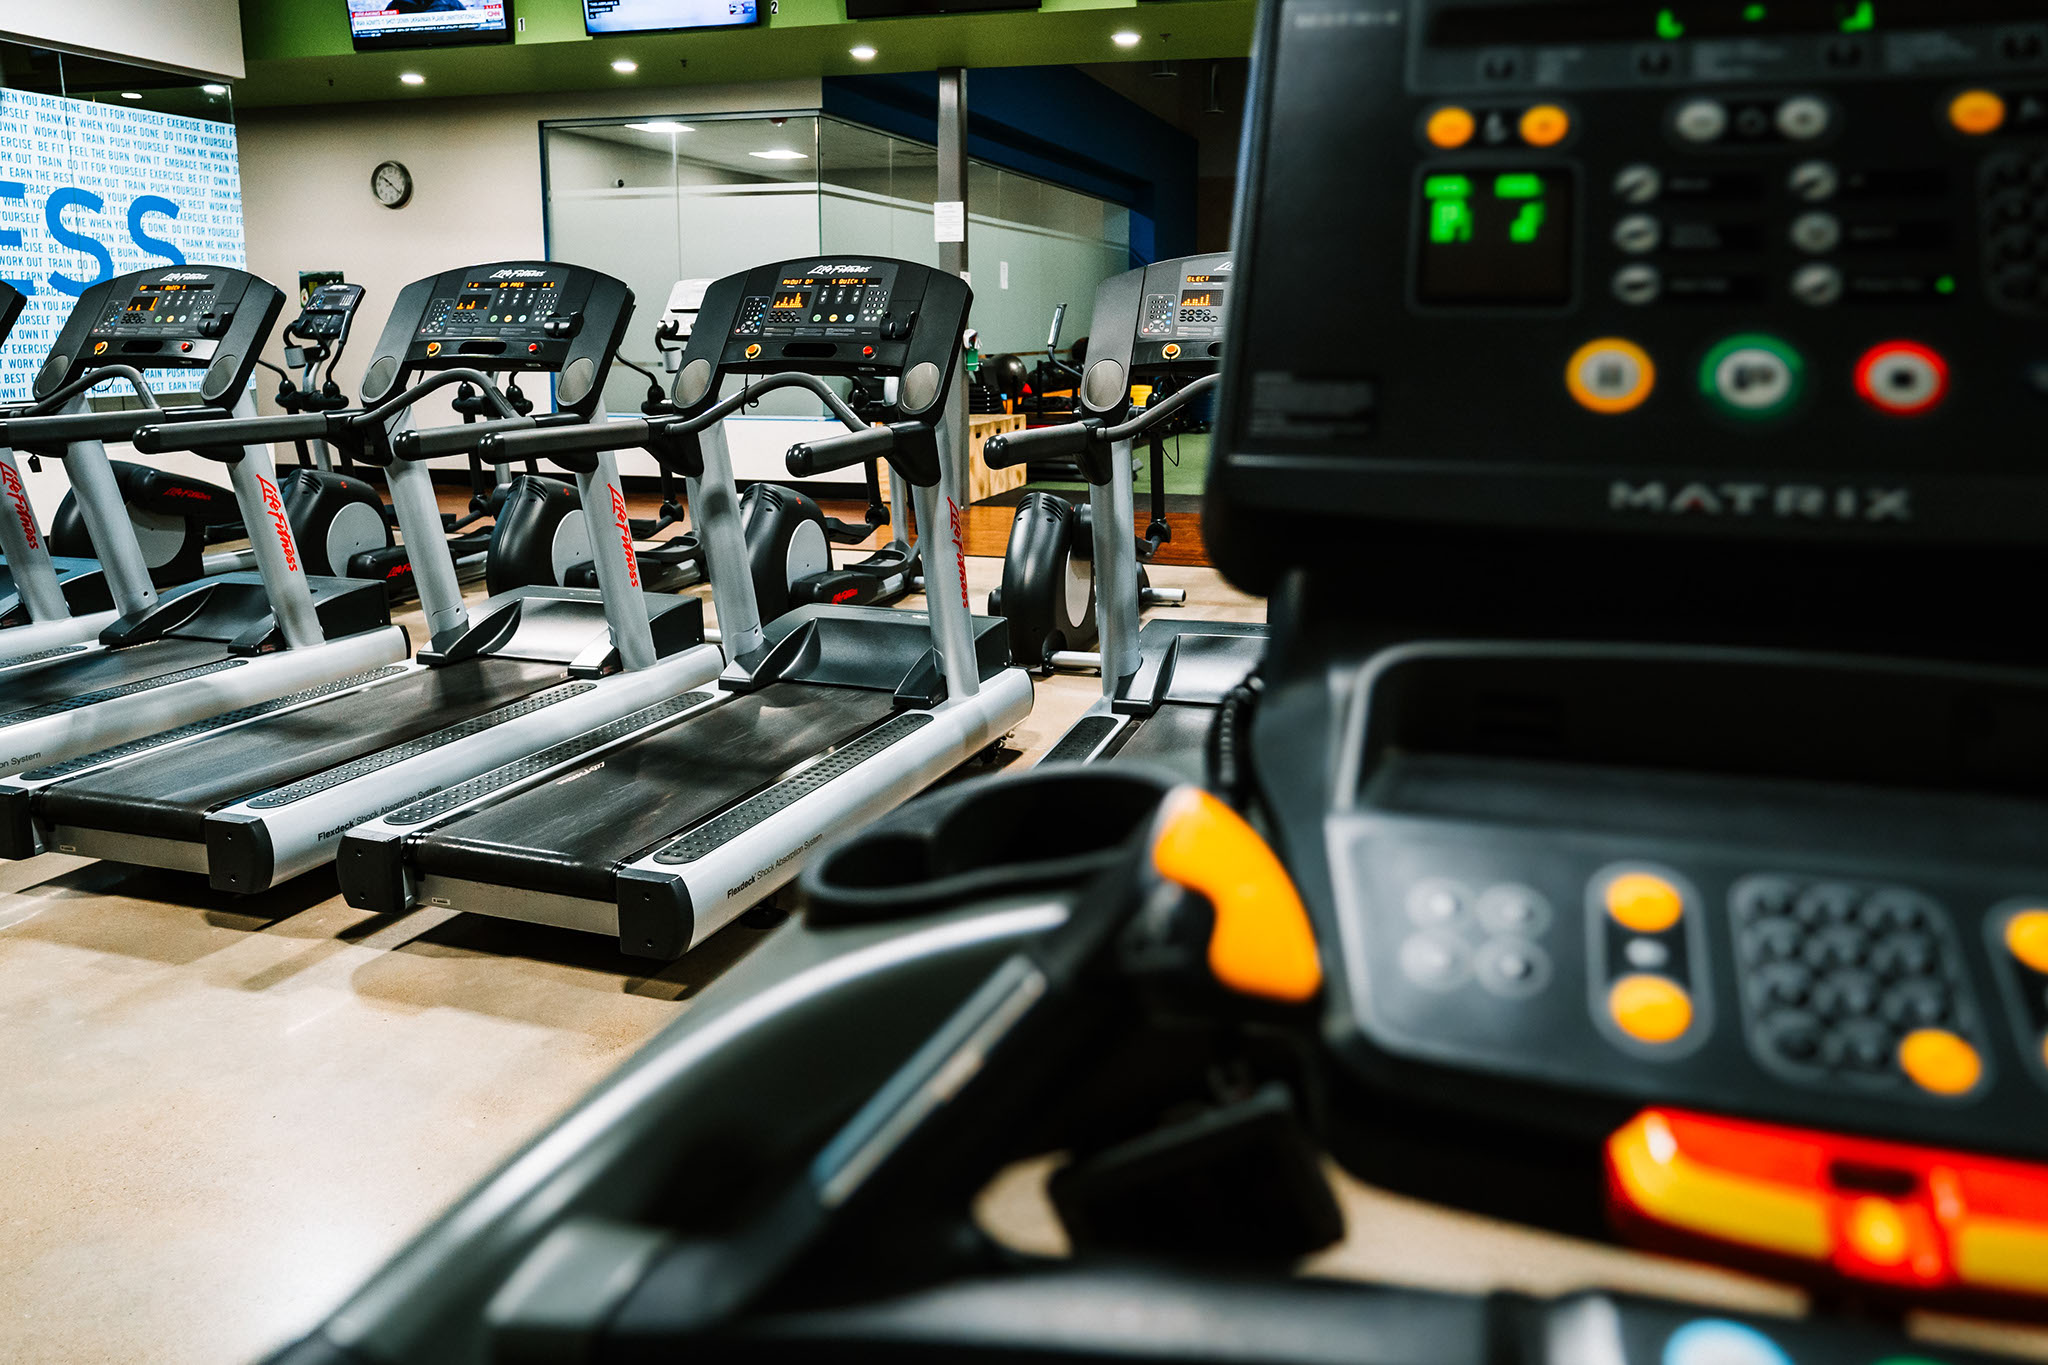 Treadmills and exercise bikes in a school gym.